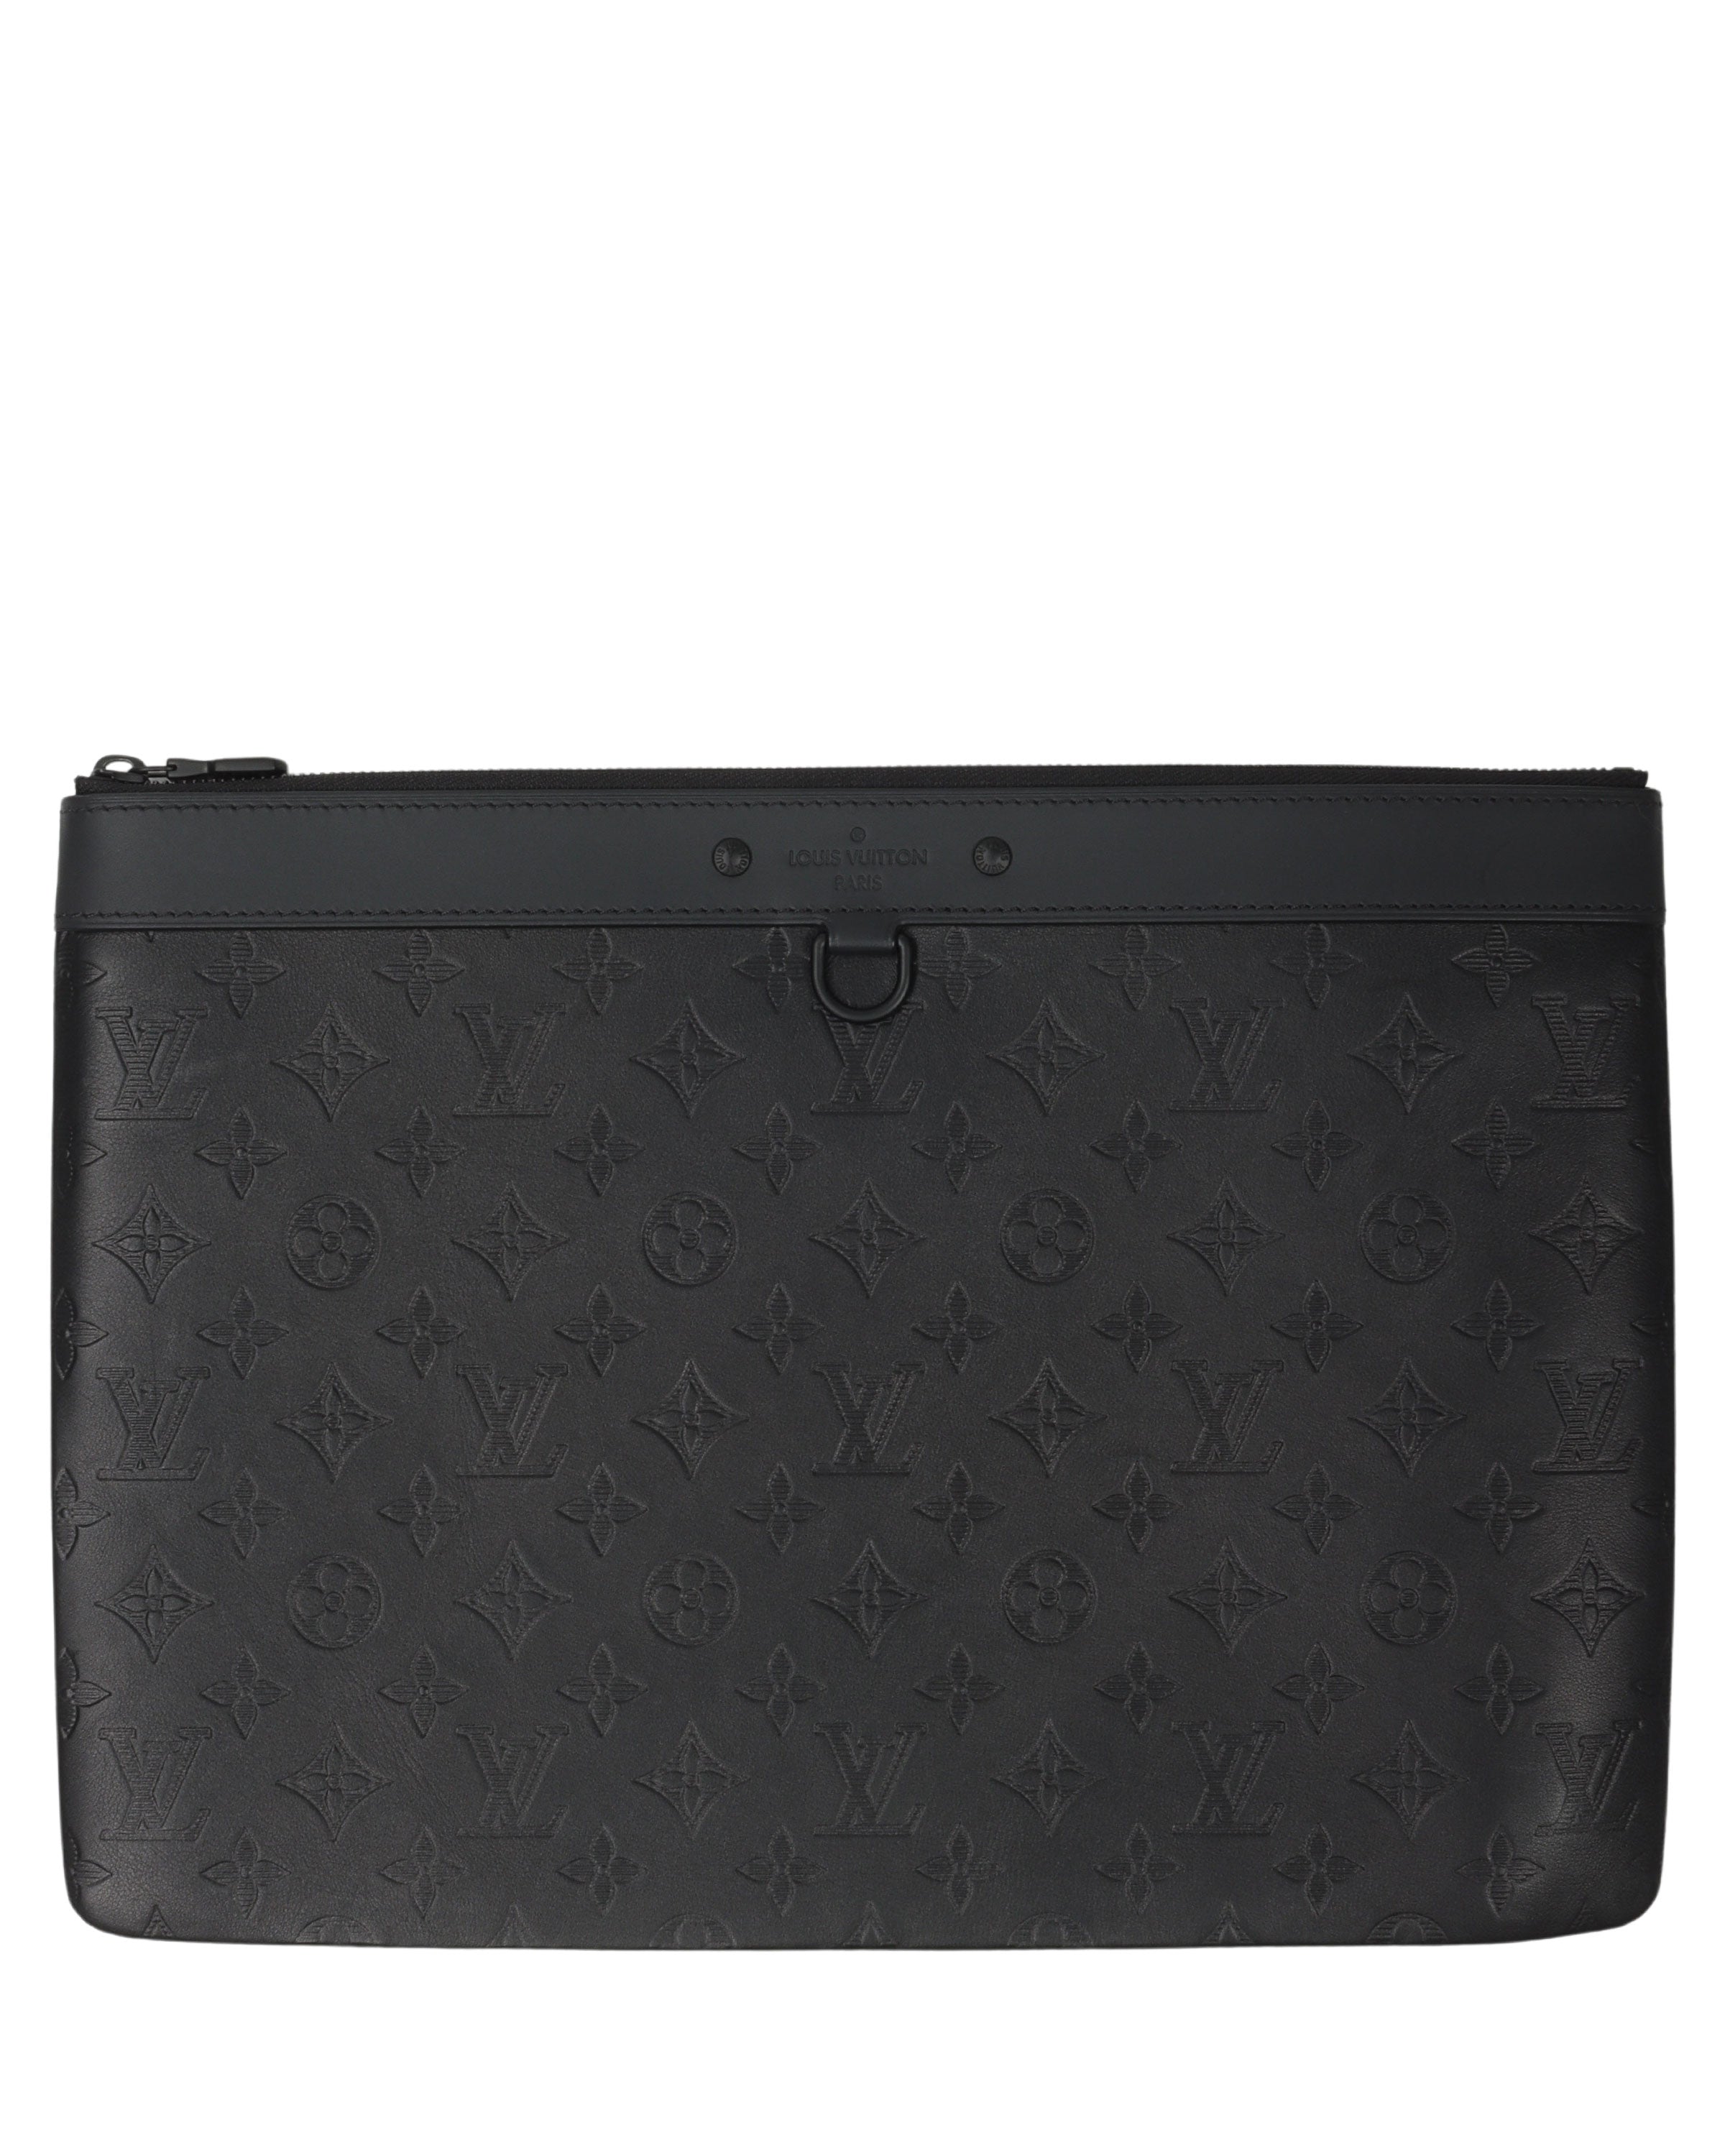 Louis Vuitton Document Holder - 5 For Sale on 1stDibs